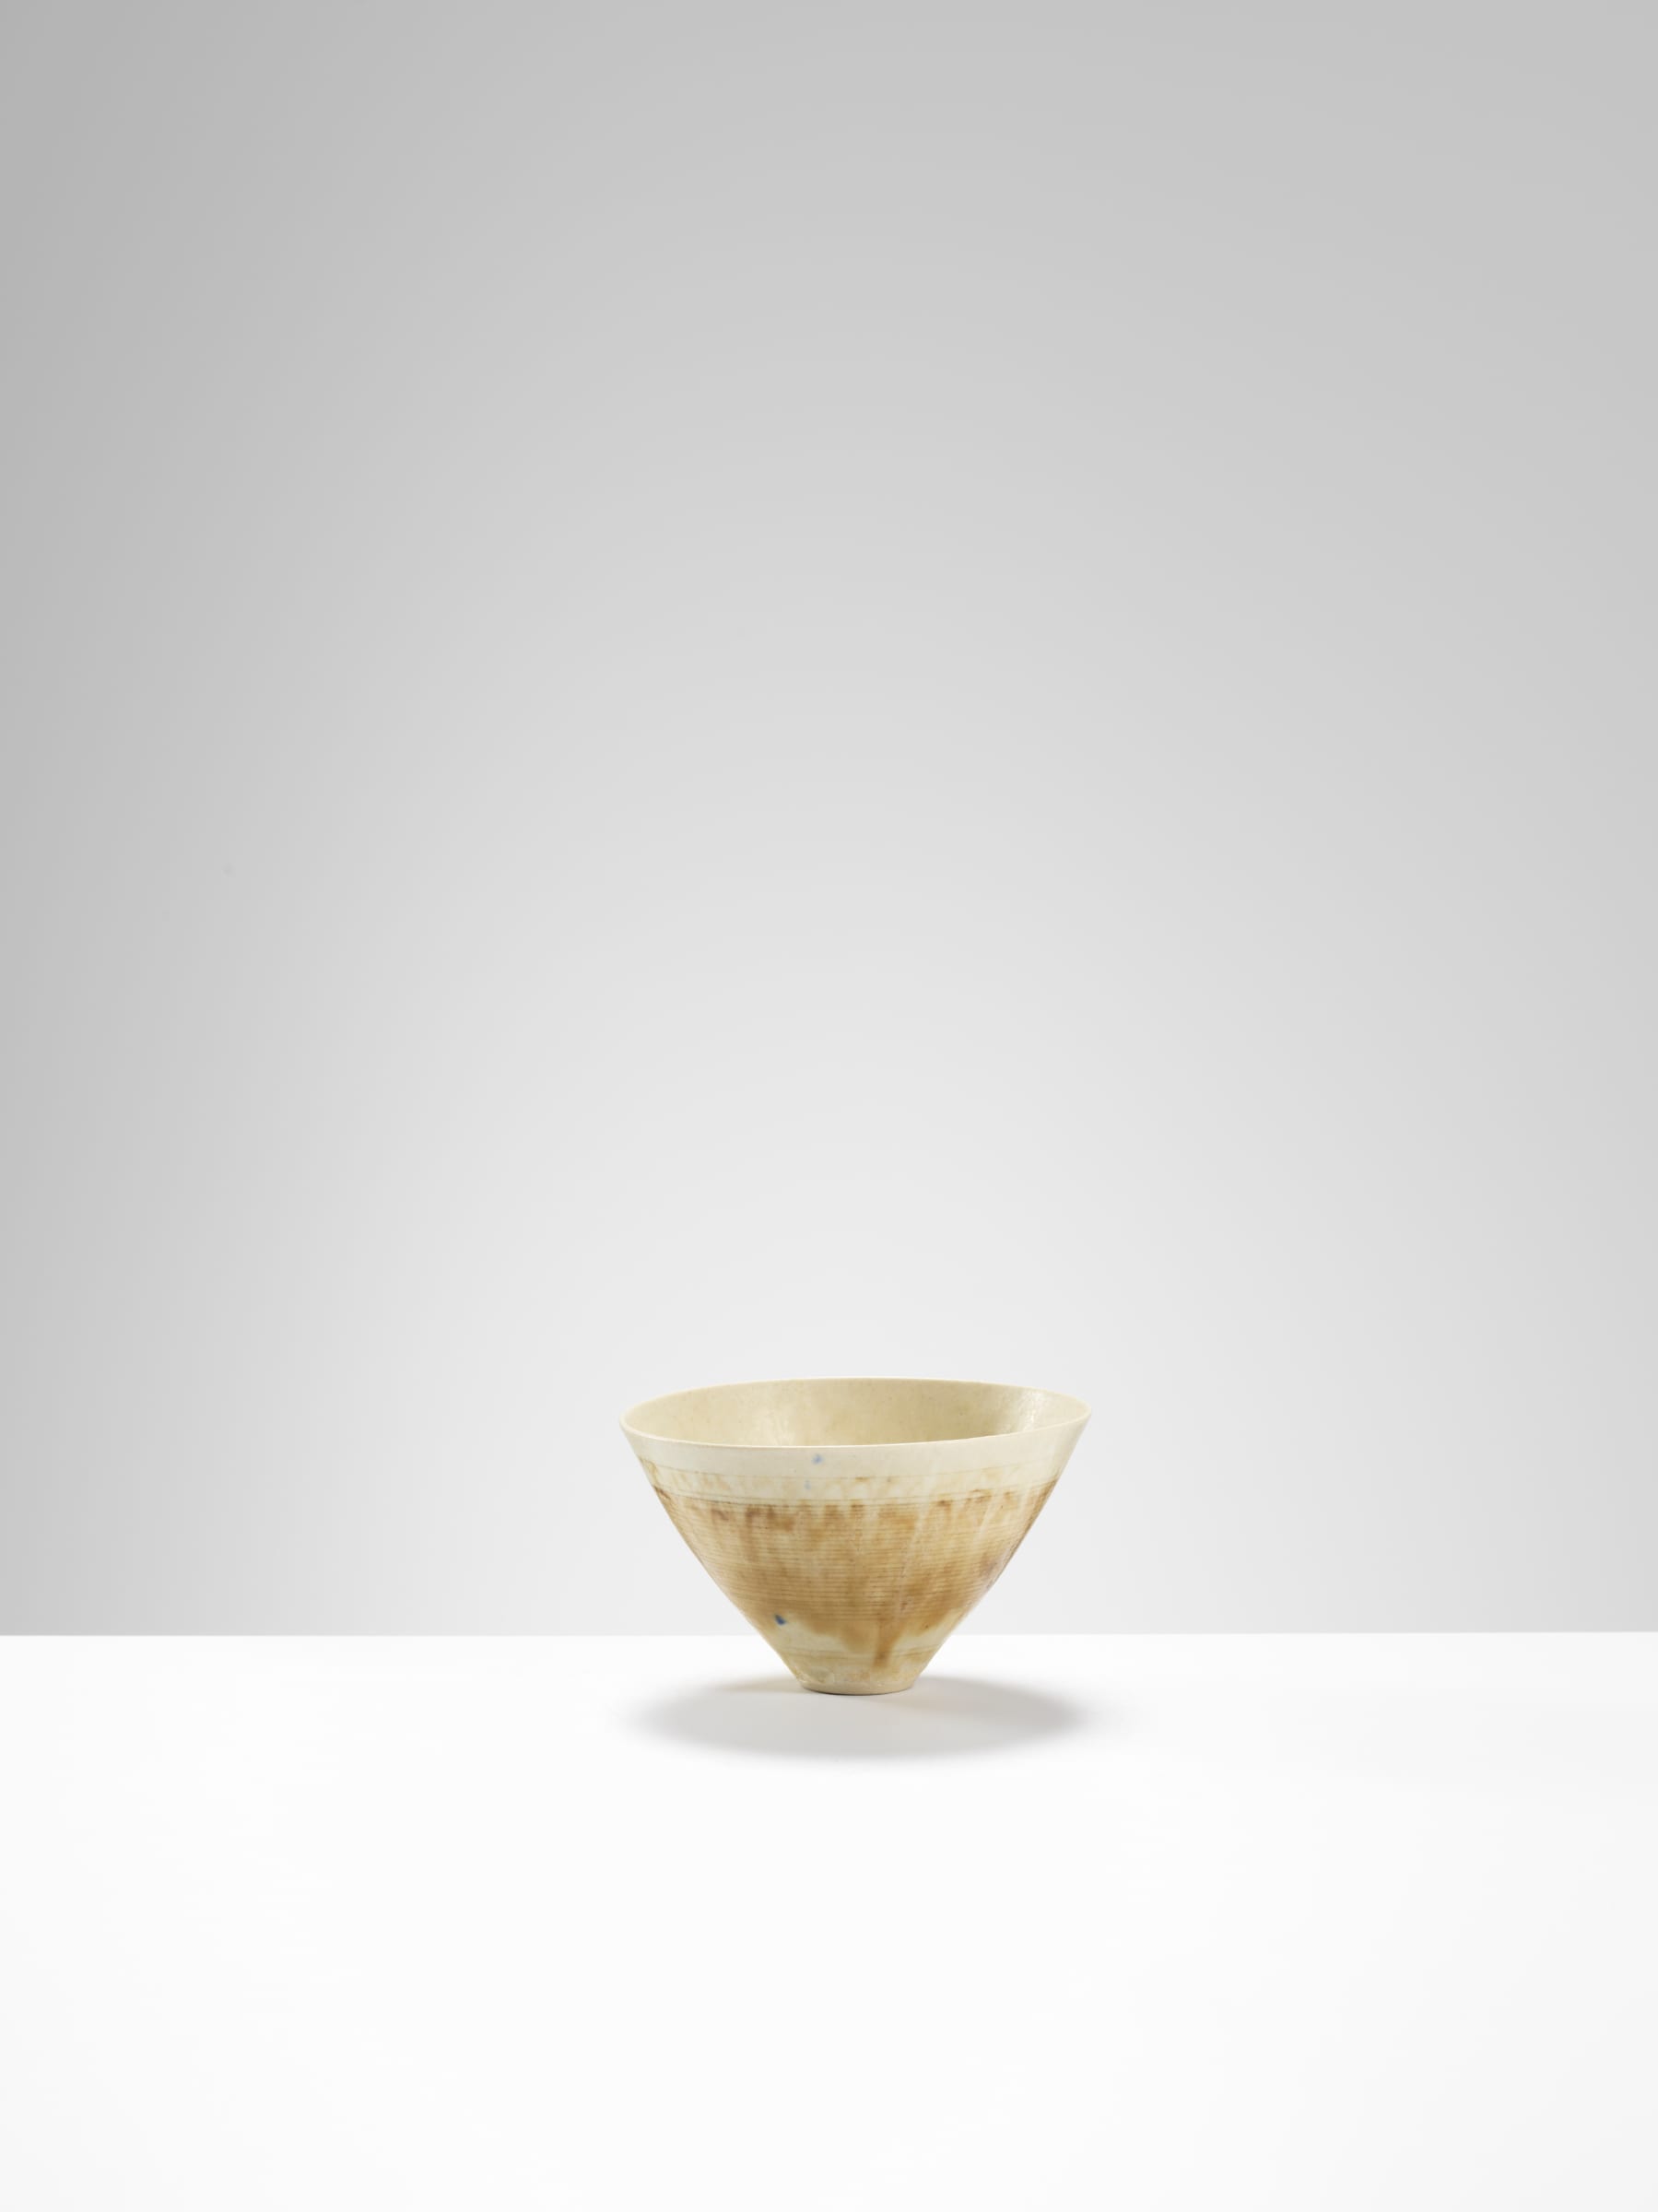 Lucie Rie, Conical Bowl, c. 1955